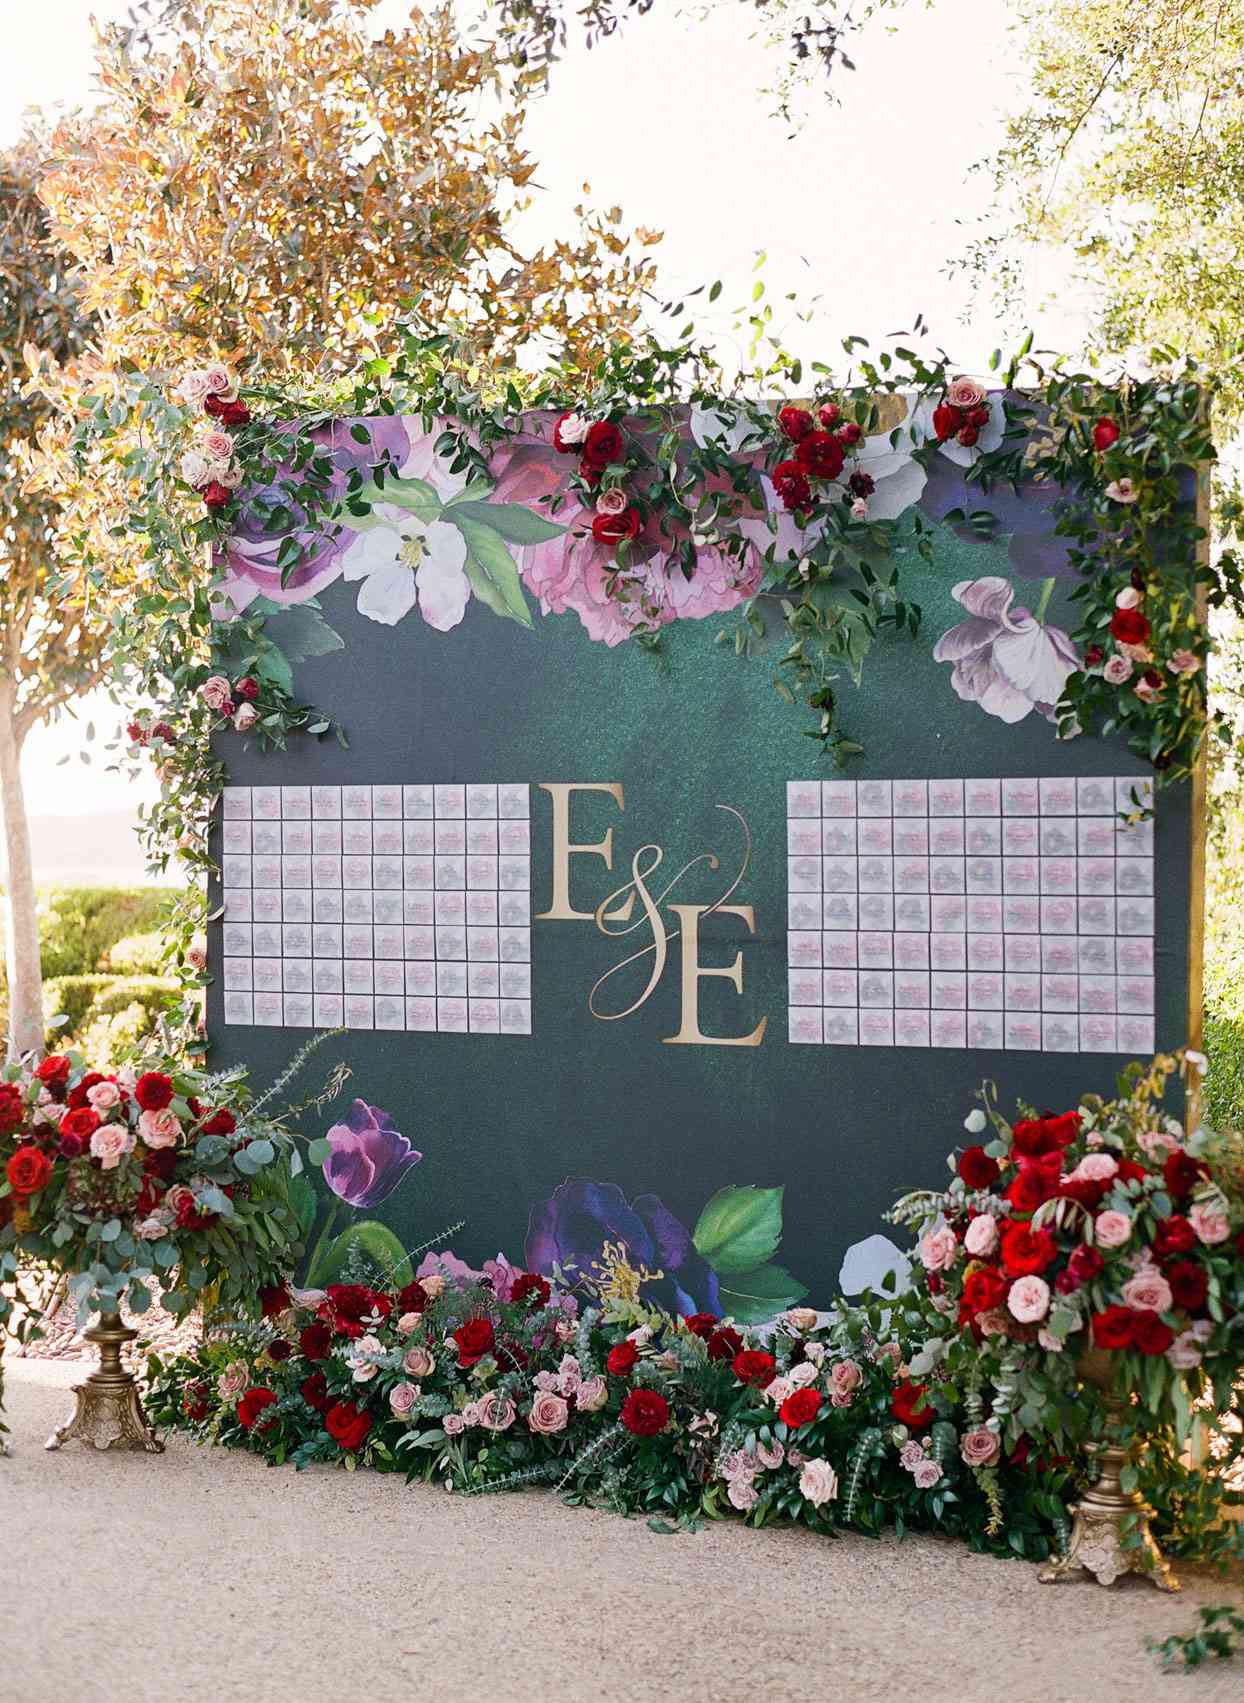 wedding seating chart board surrounded by flowers